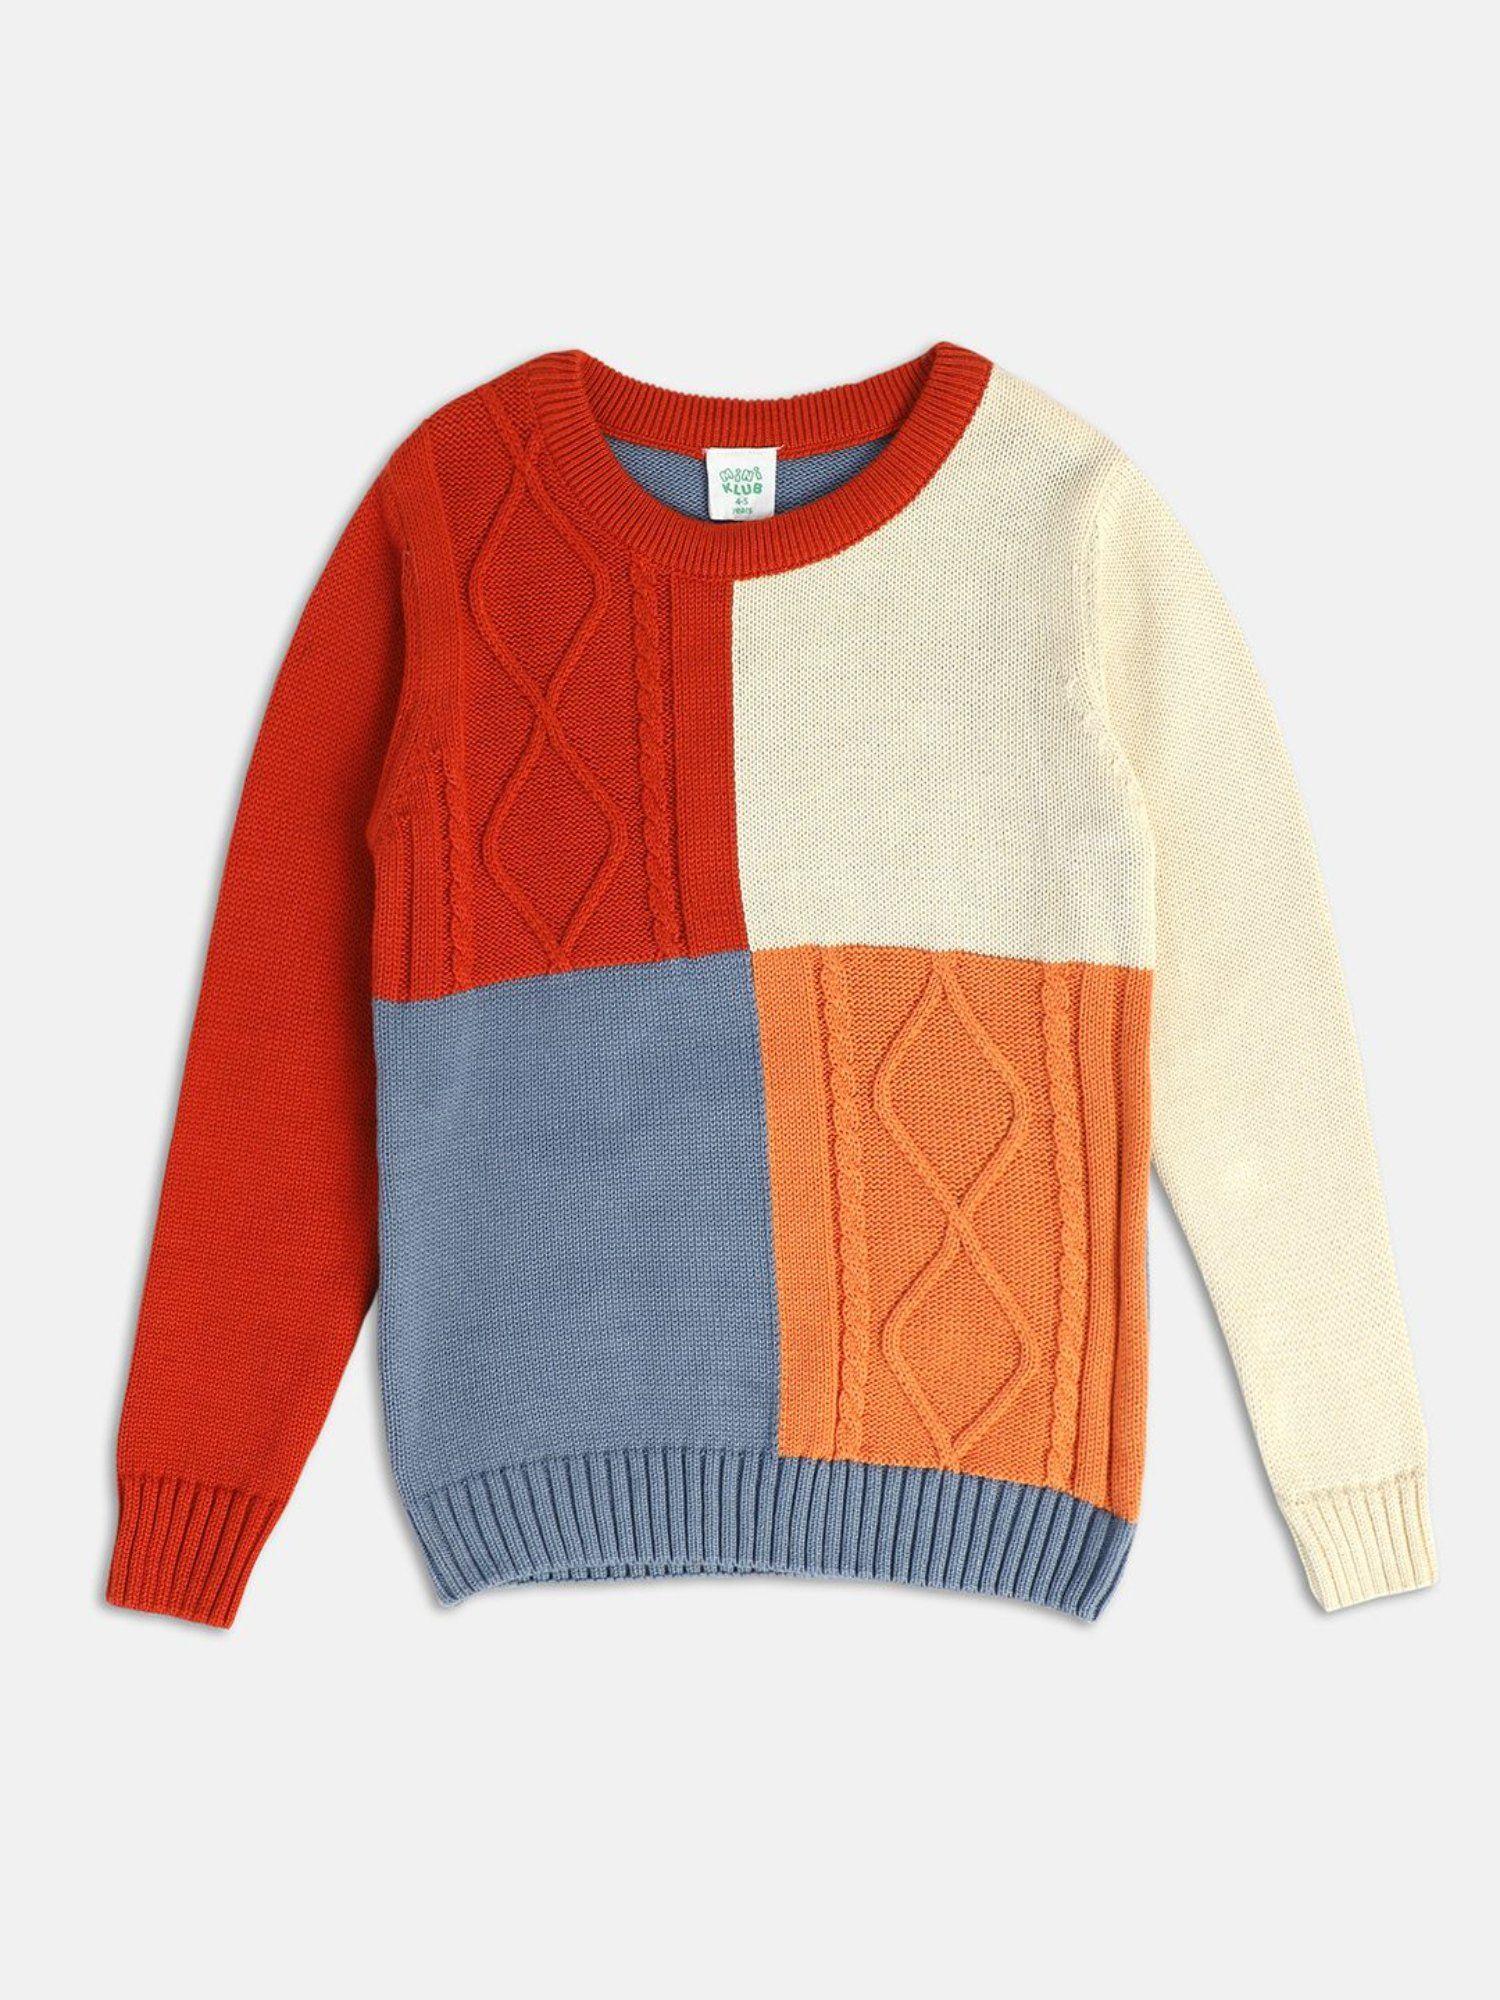 new born and baby boys colorblock sweater